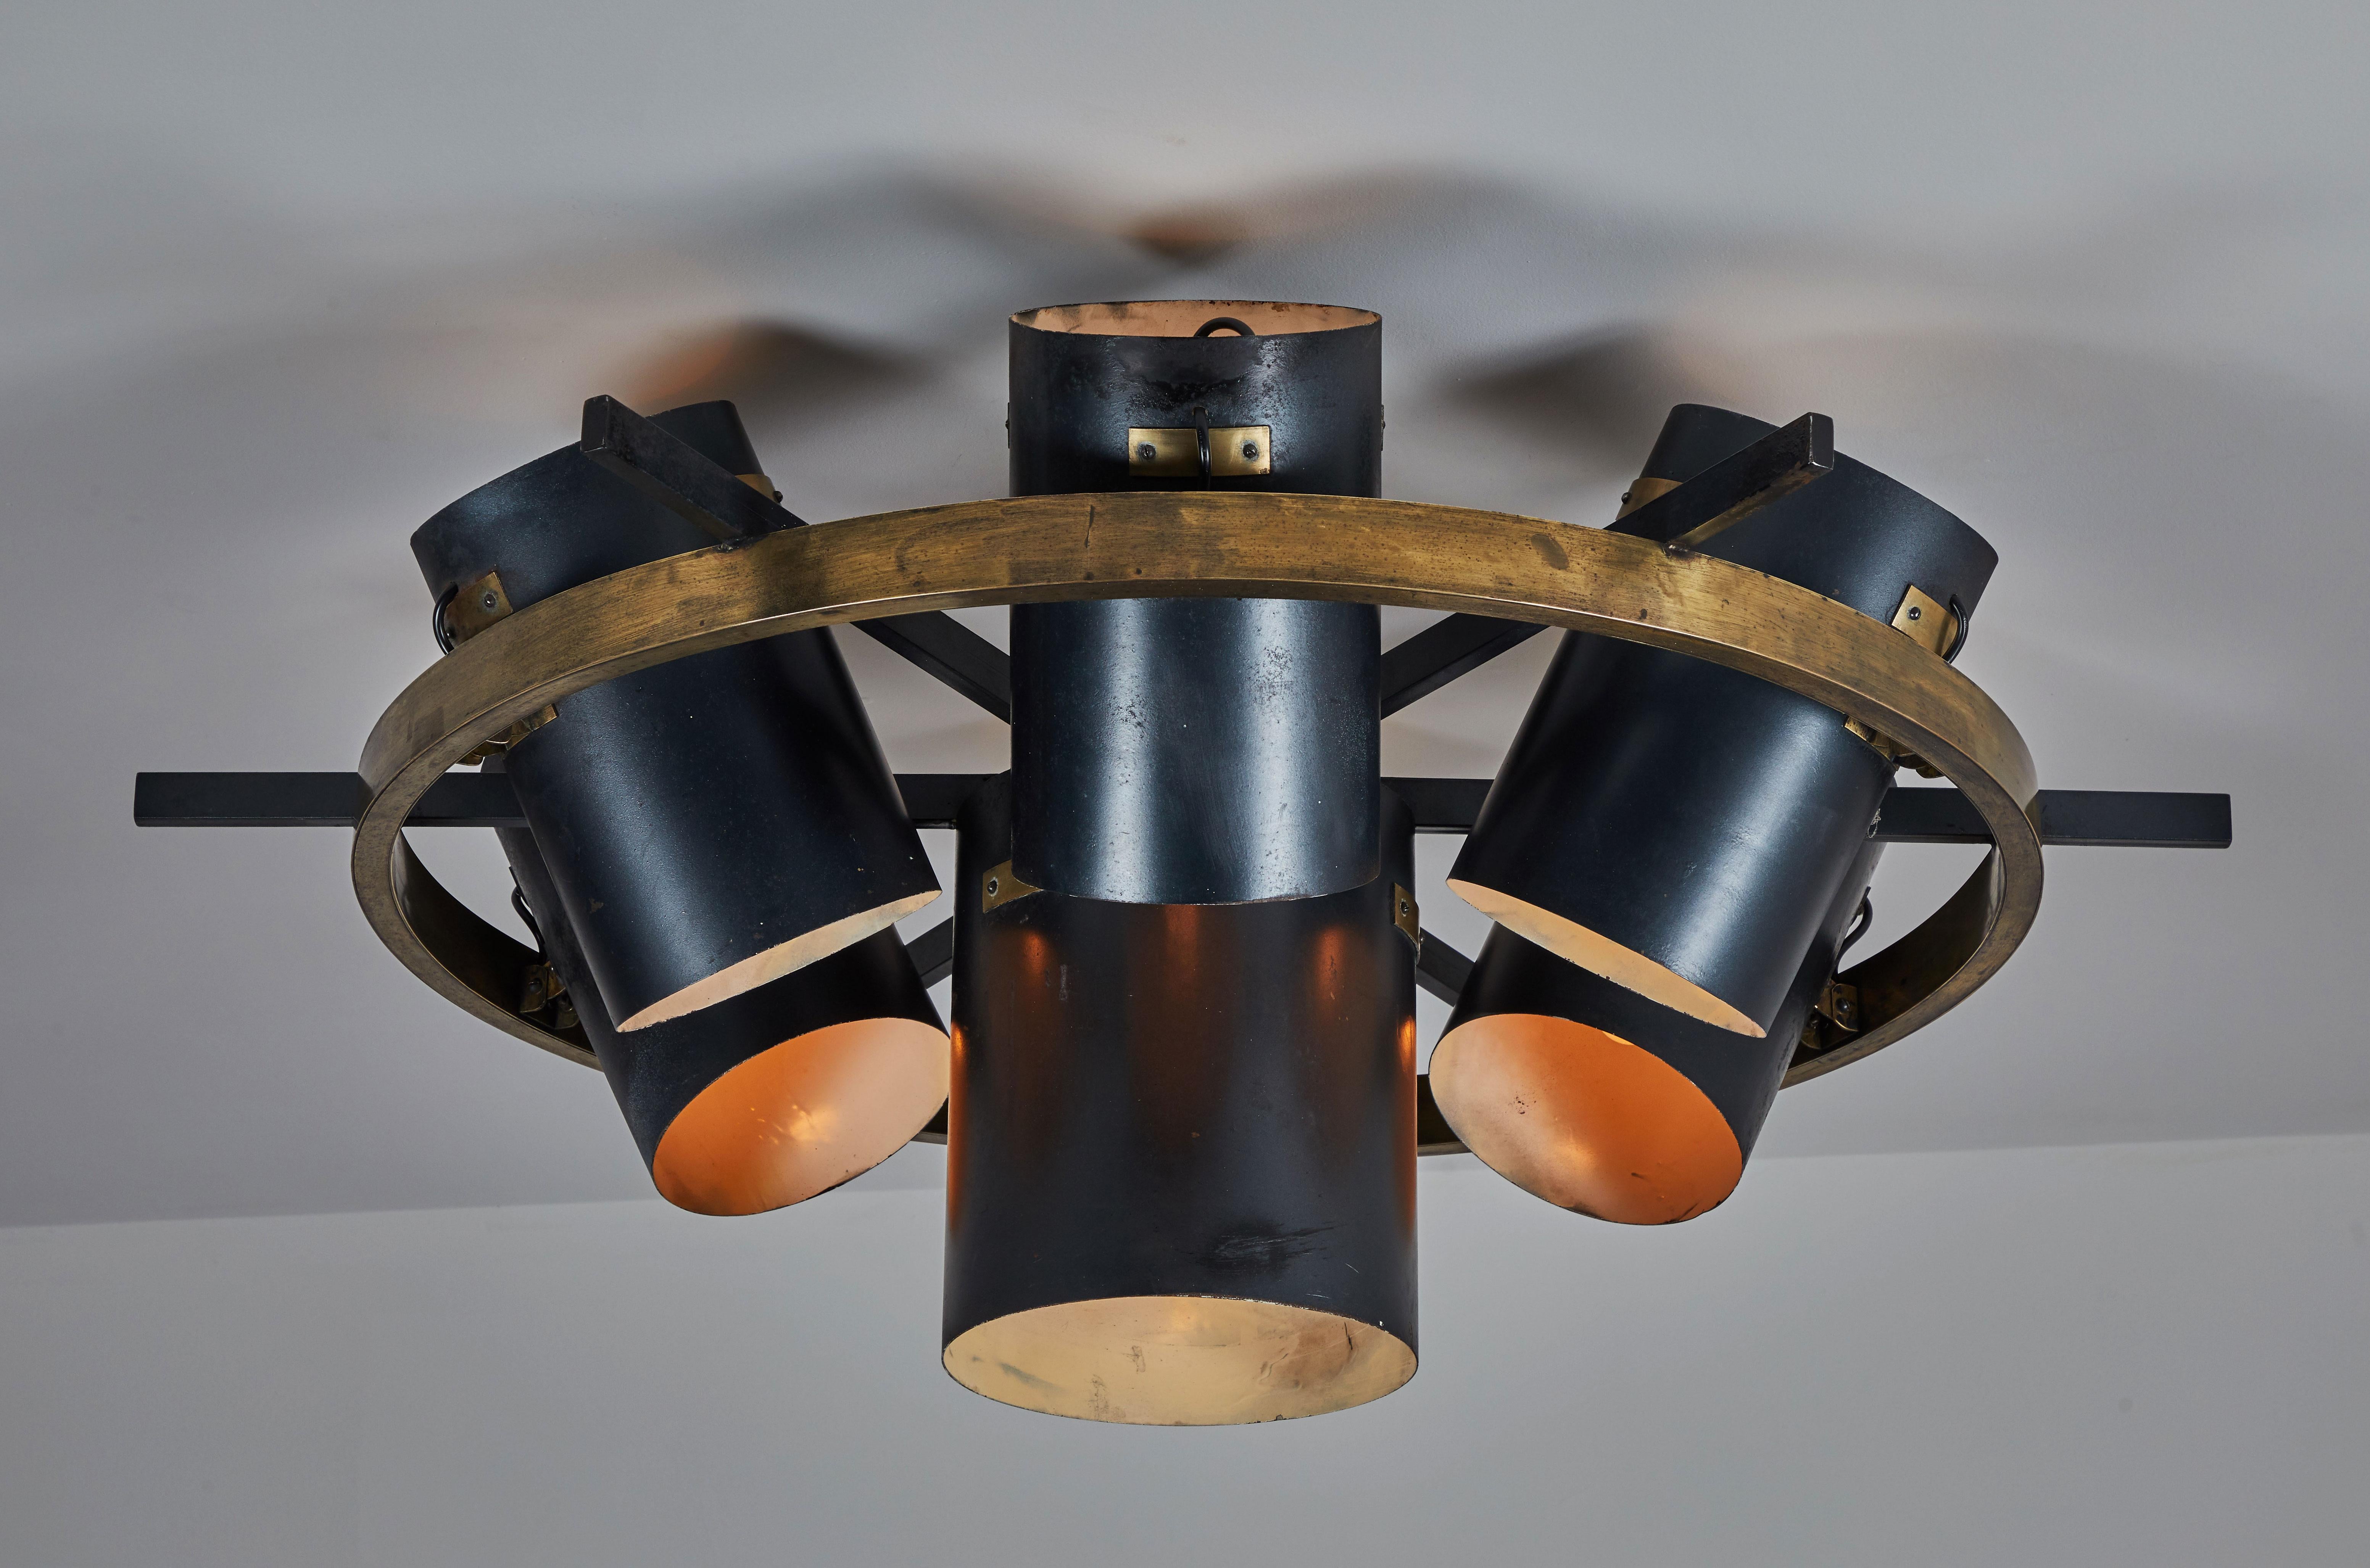 Single large custom Italian ceiling light. Designed in Italy, circa 1960s. Brass and enameled metal. Rewired for US junction boxes. Shades articulate in various positions. Takes six E27 25w maximum bulbs per light. Only one available.